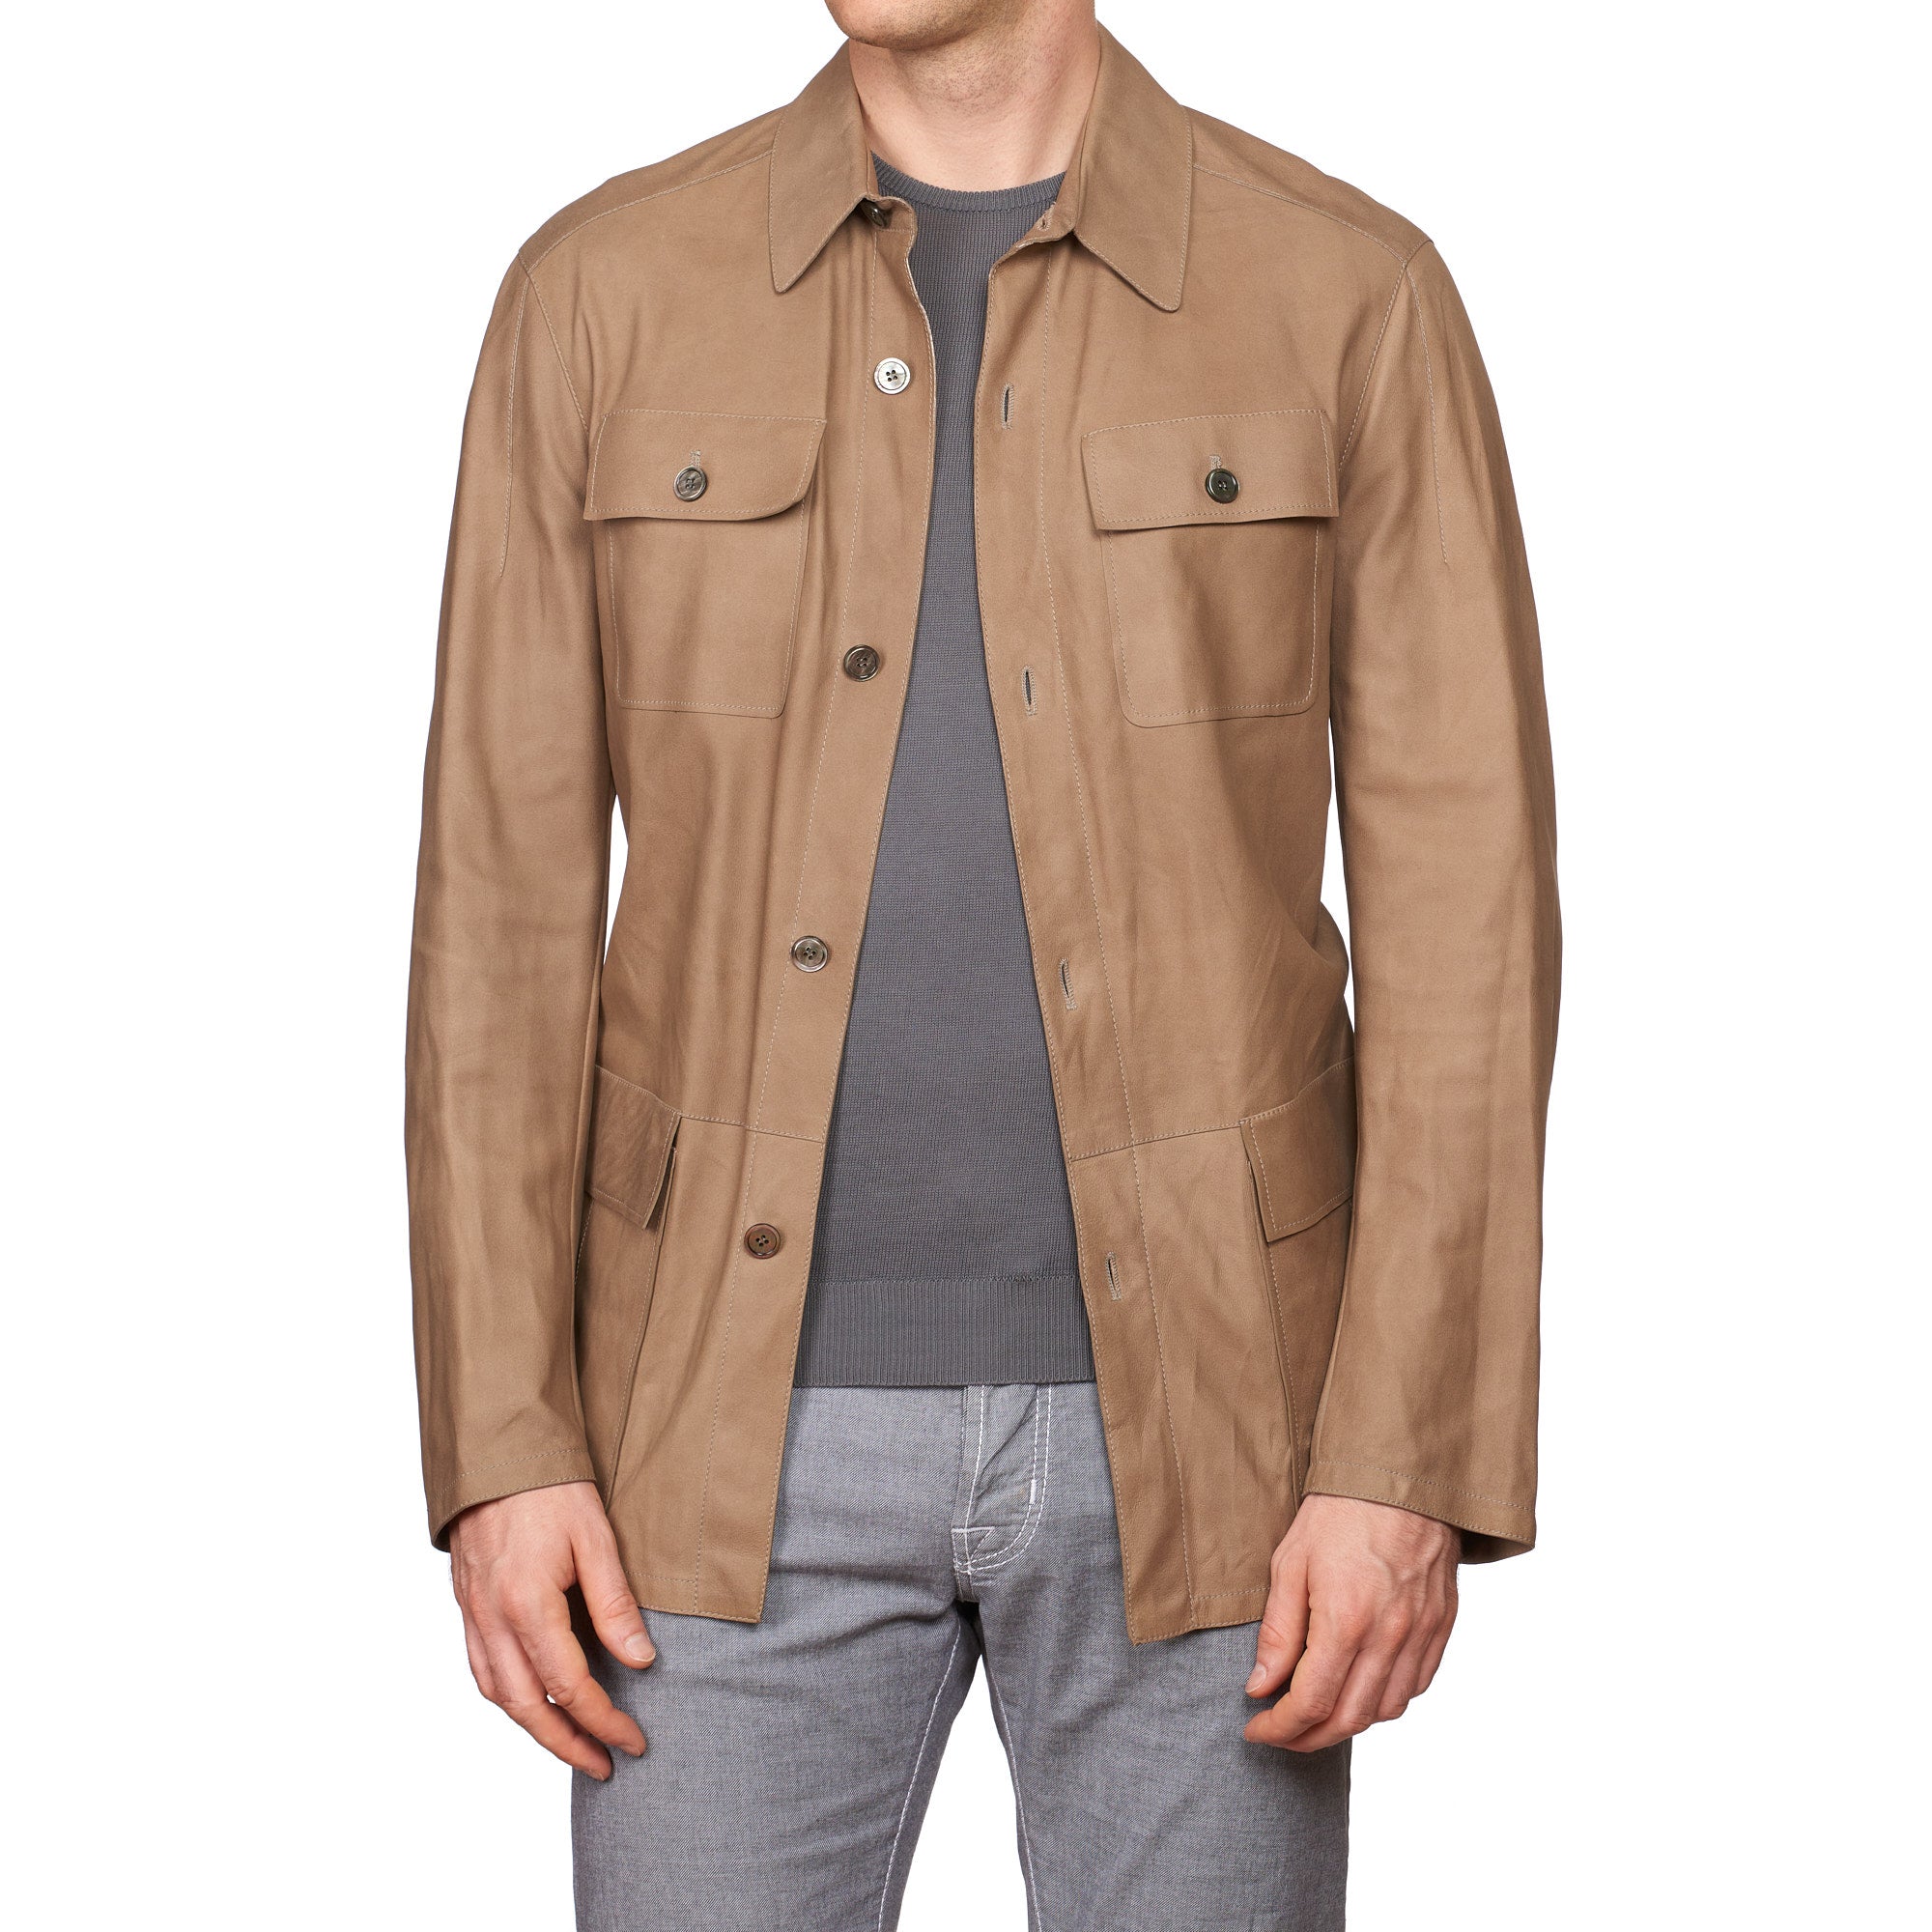 SERAPHIN Tan Suede Goat Leather Unlined Field Jacket FR 50 US M NEW